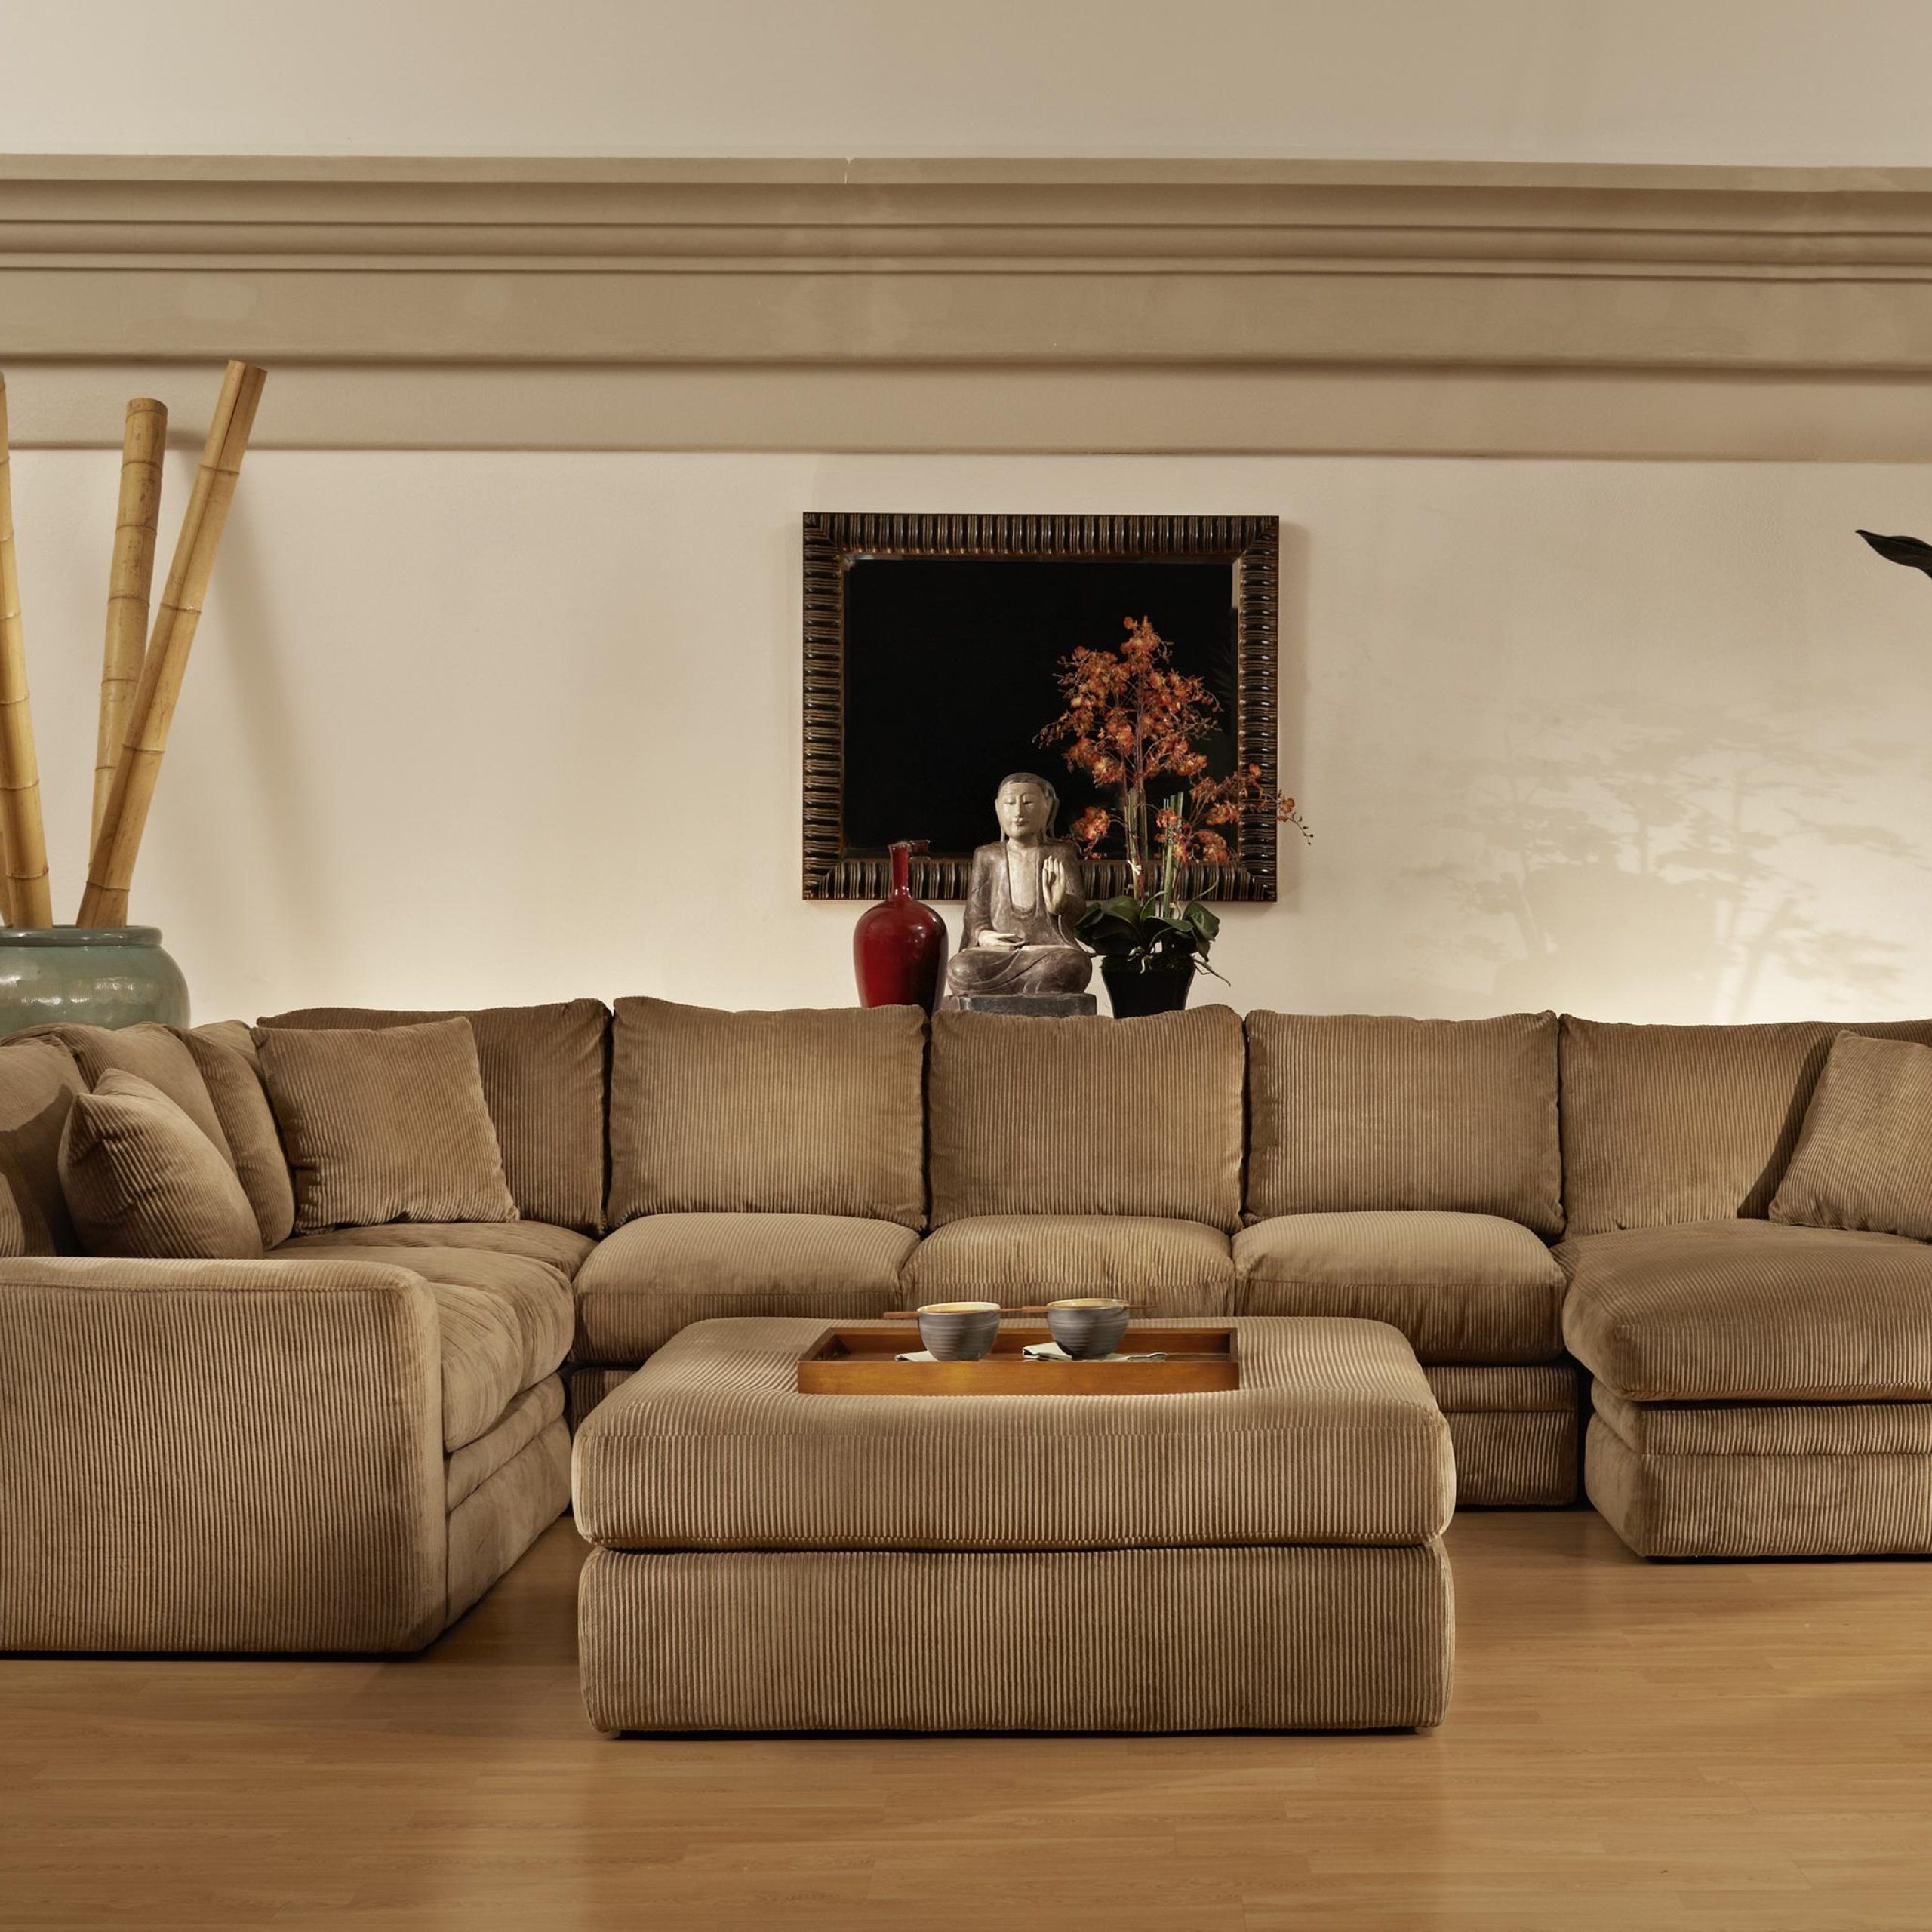 Best Sectional Sofas With Recliners And Chaise | Homesfeed With Regard To Sofas With Ottomans (View 11 of 20)